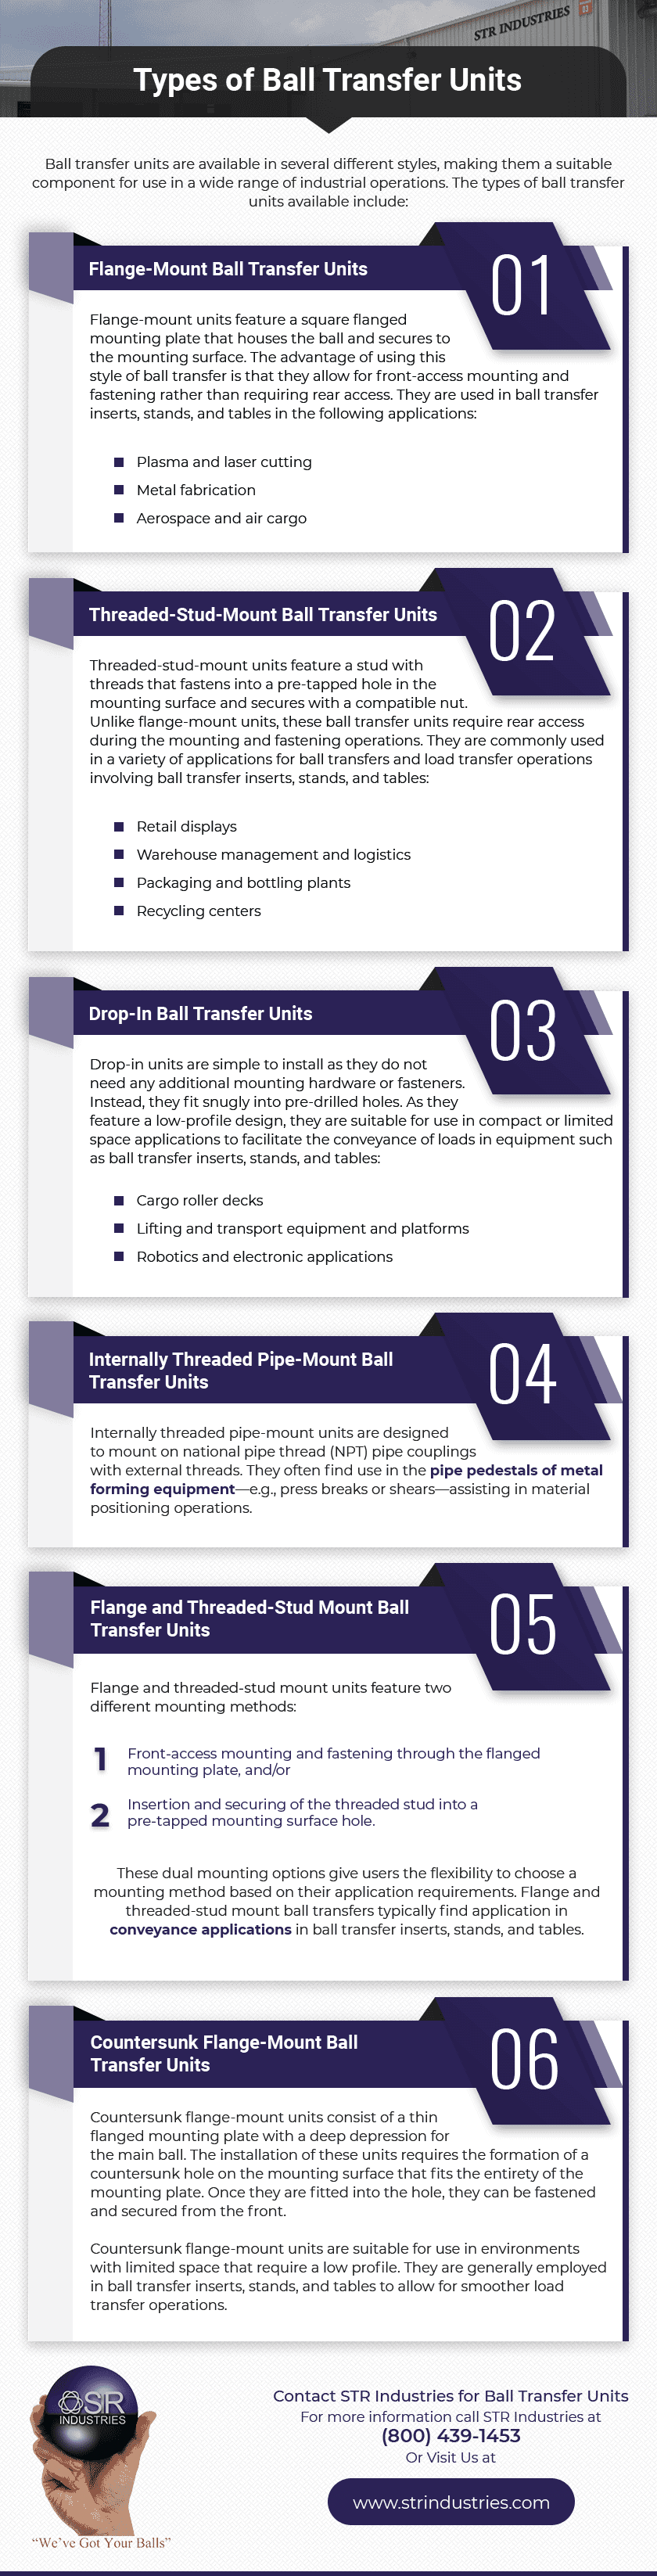 Types of ball transfer units